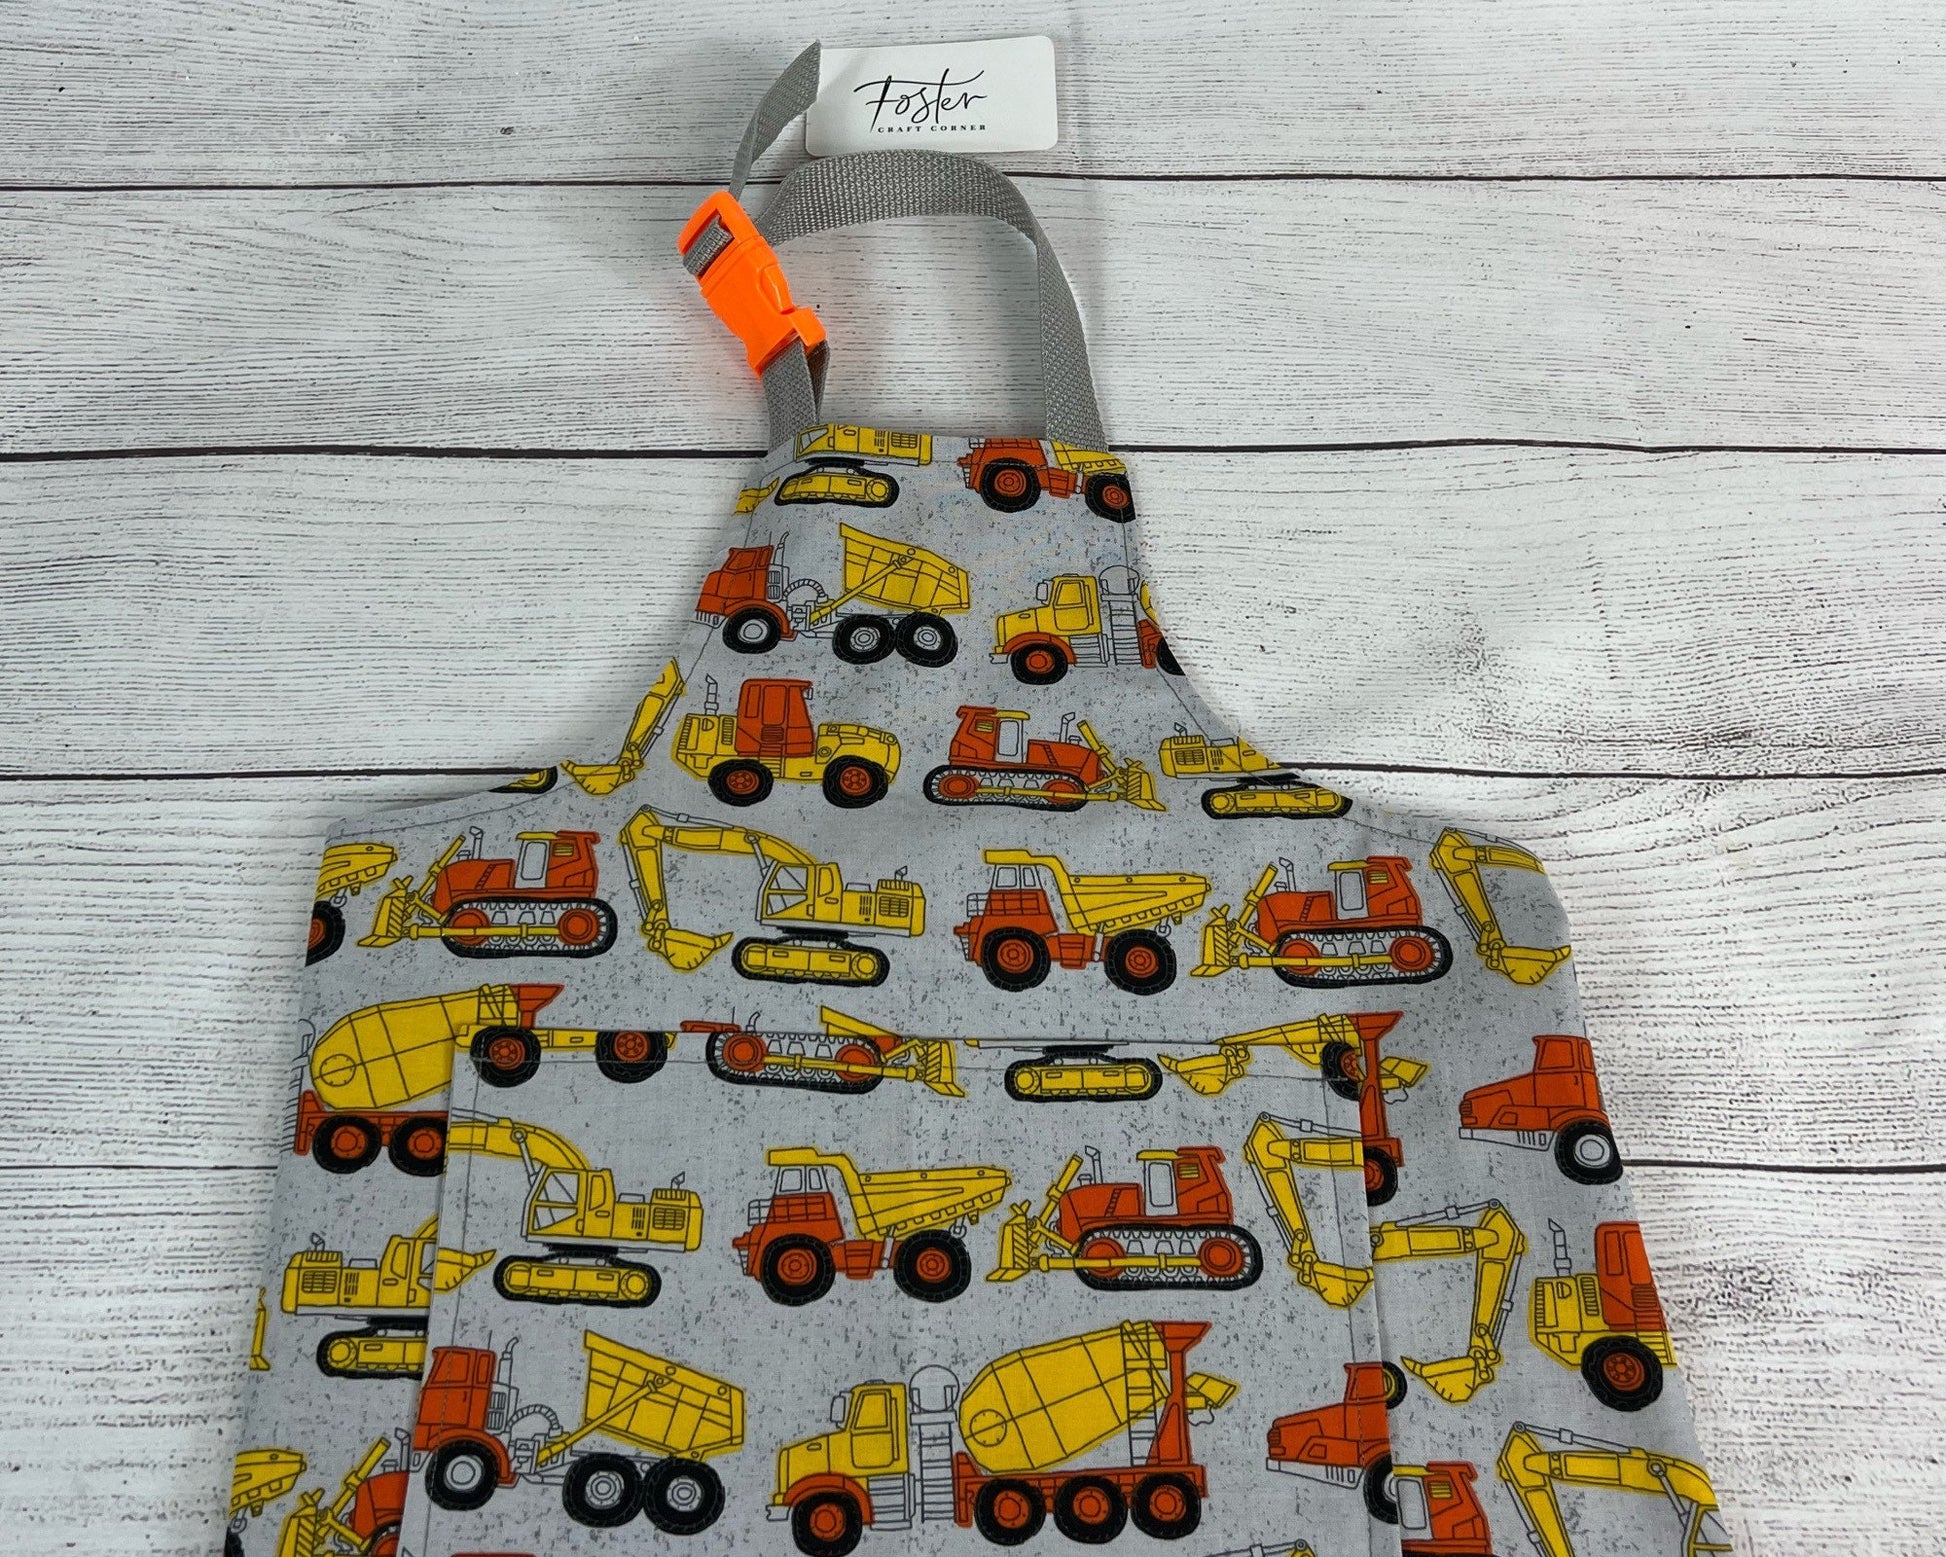 Toddler Apron - Kitchen - Cooking - Early Cooking Skills - Toddler Messes - Toddler Accessories - Construction Trucks - Present- Small Apron